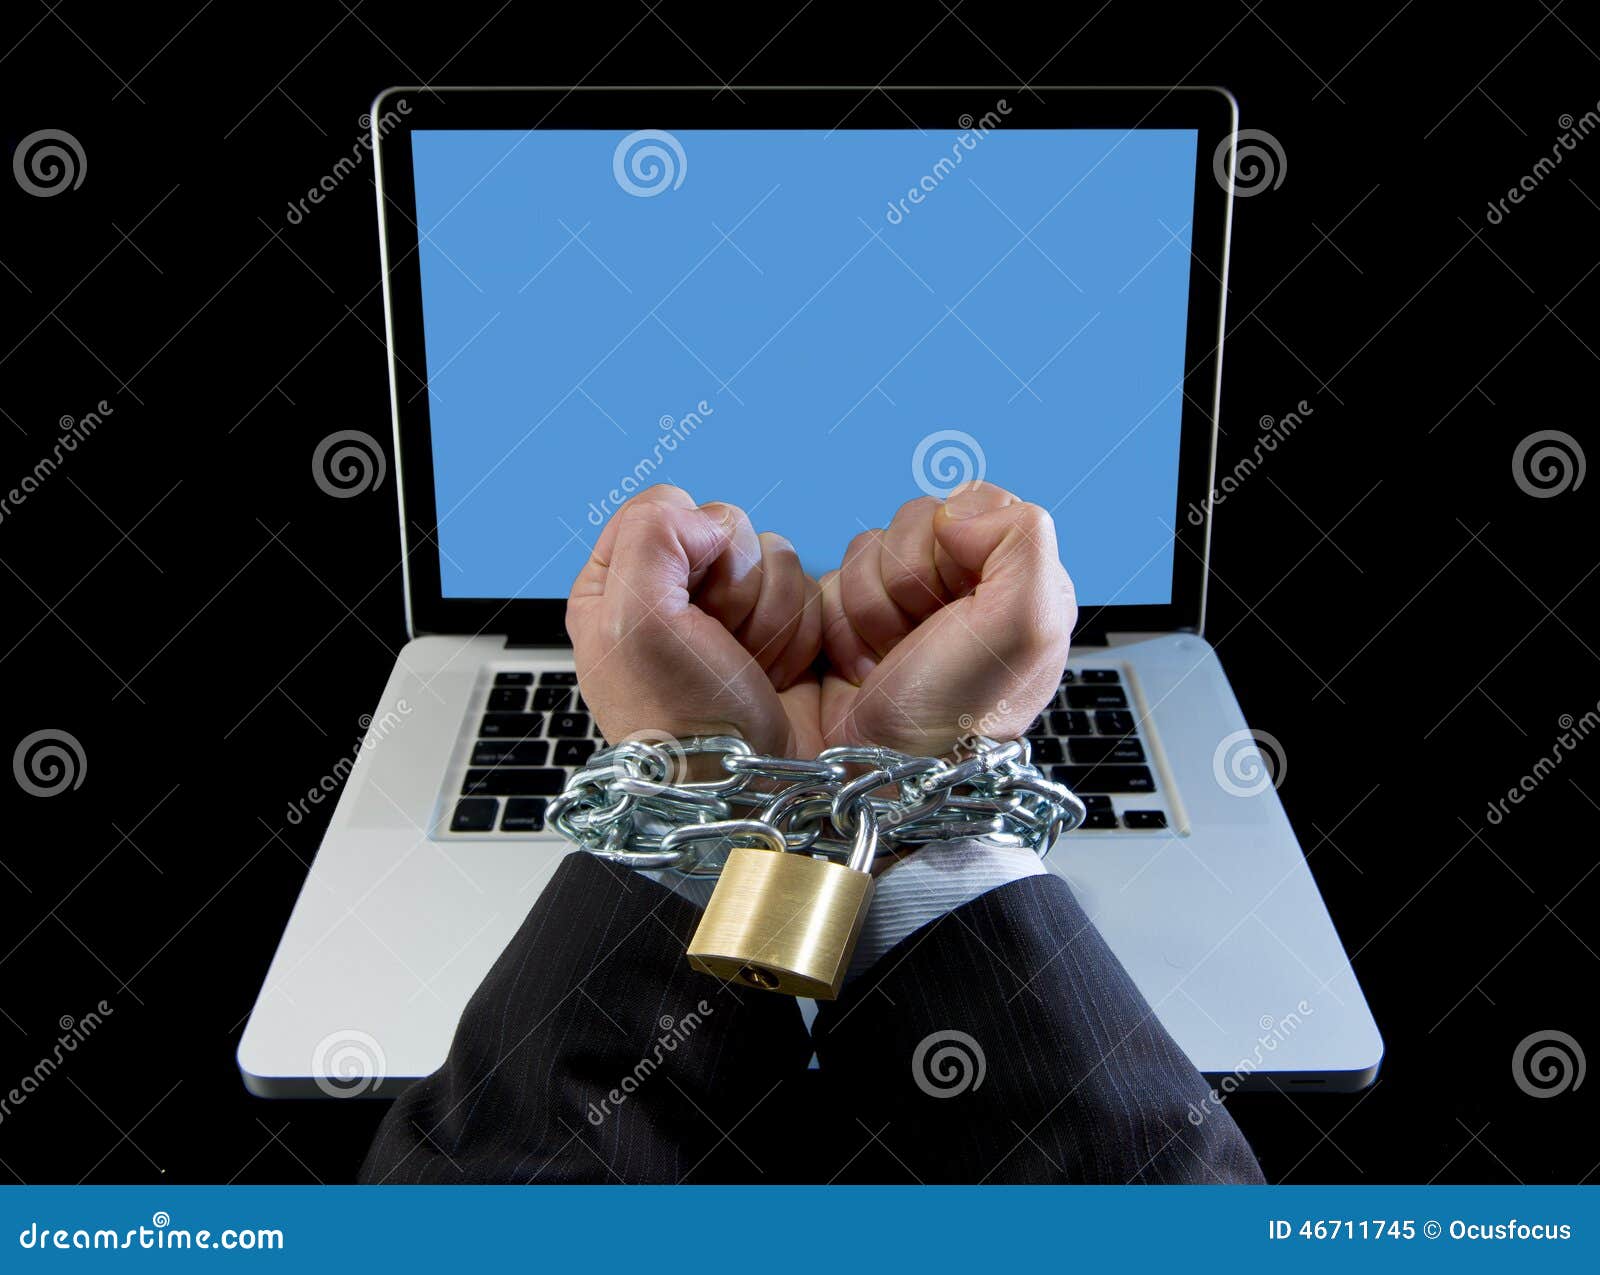 hands of businessman addicted to work bond with chain to computer laptop in workaholic